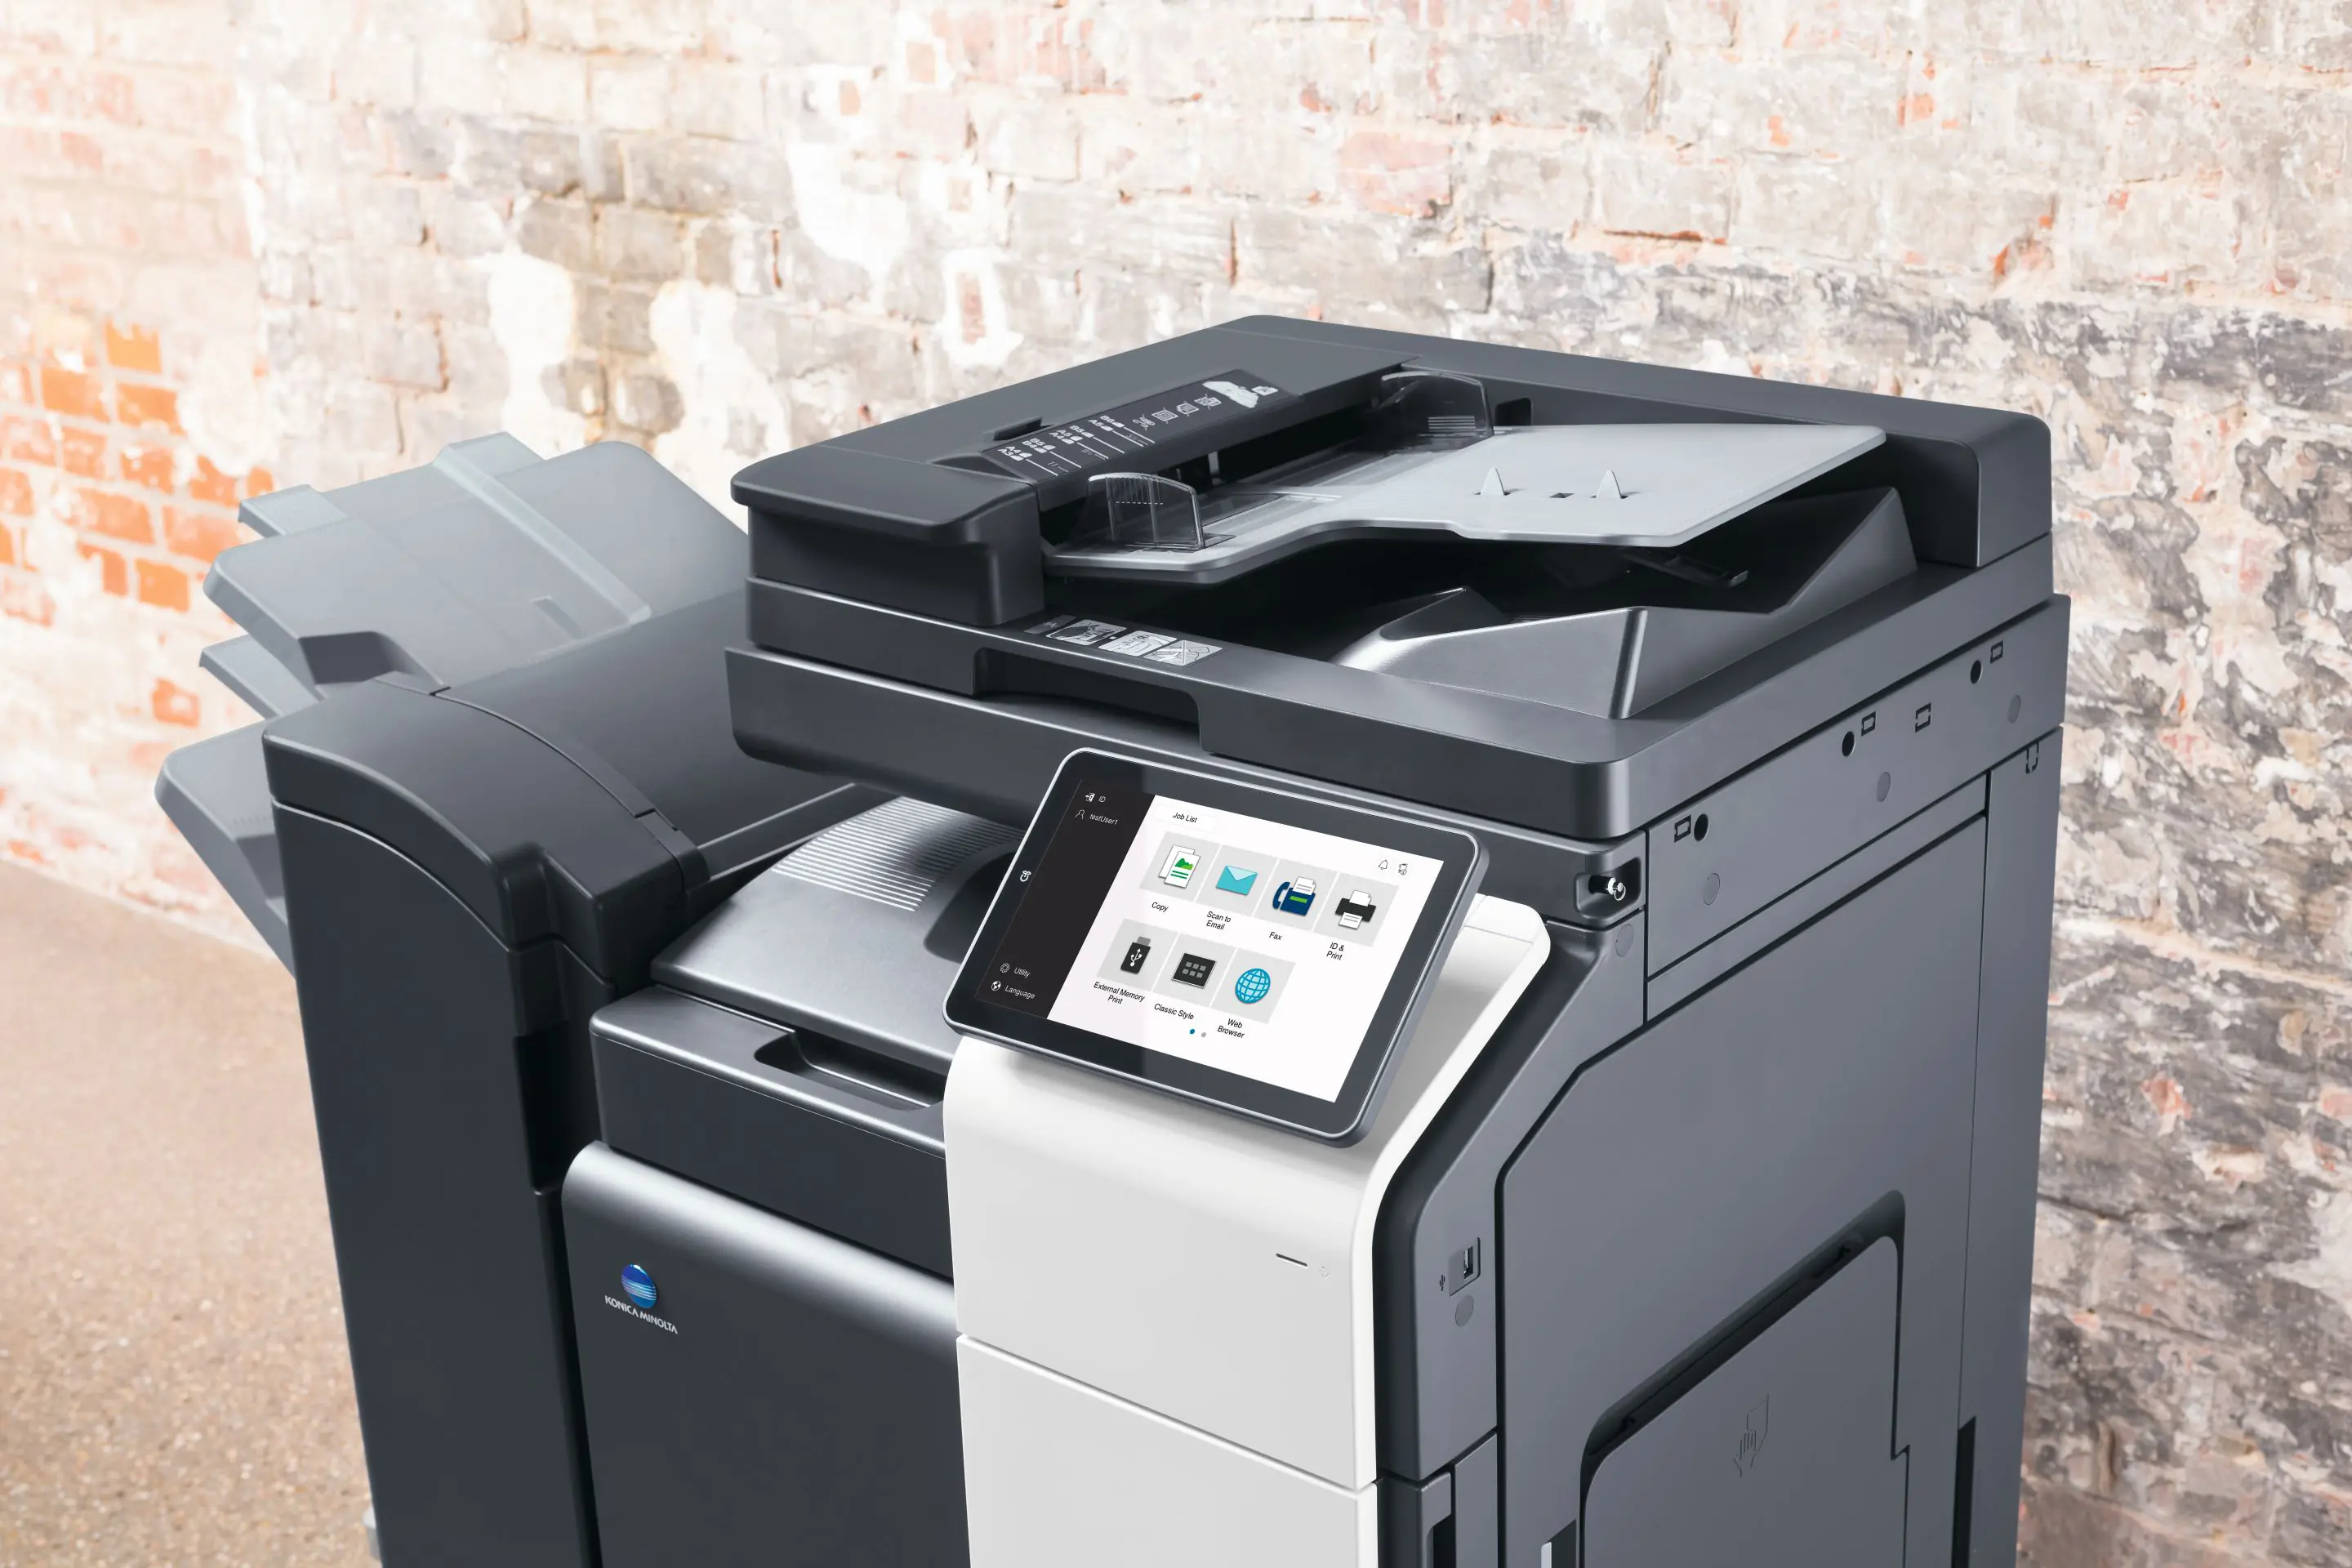 High-quality printers made accessible with rent options